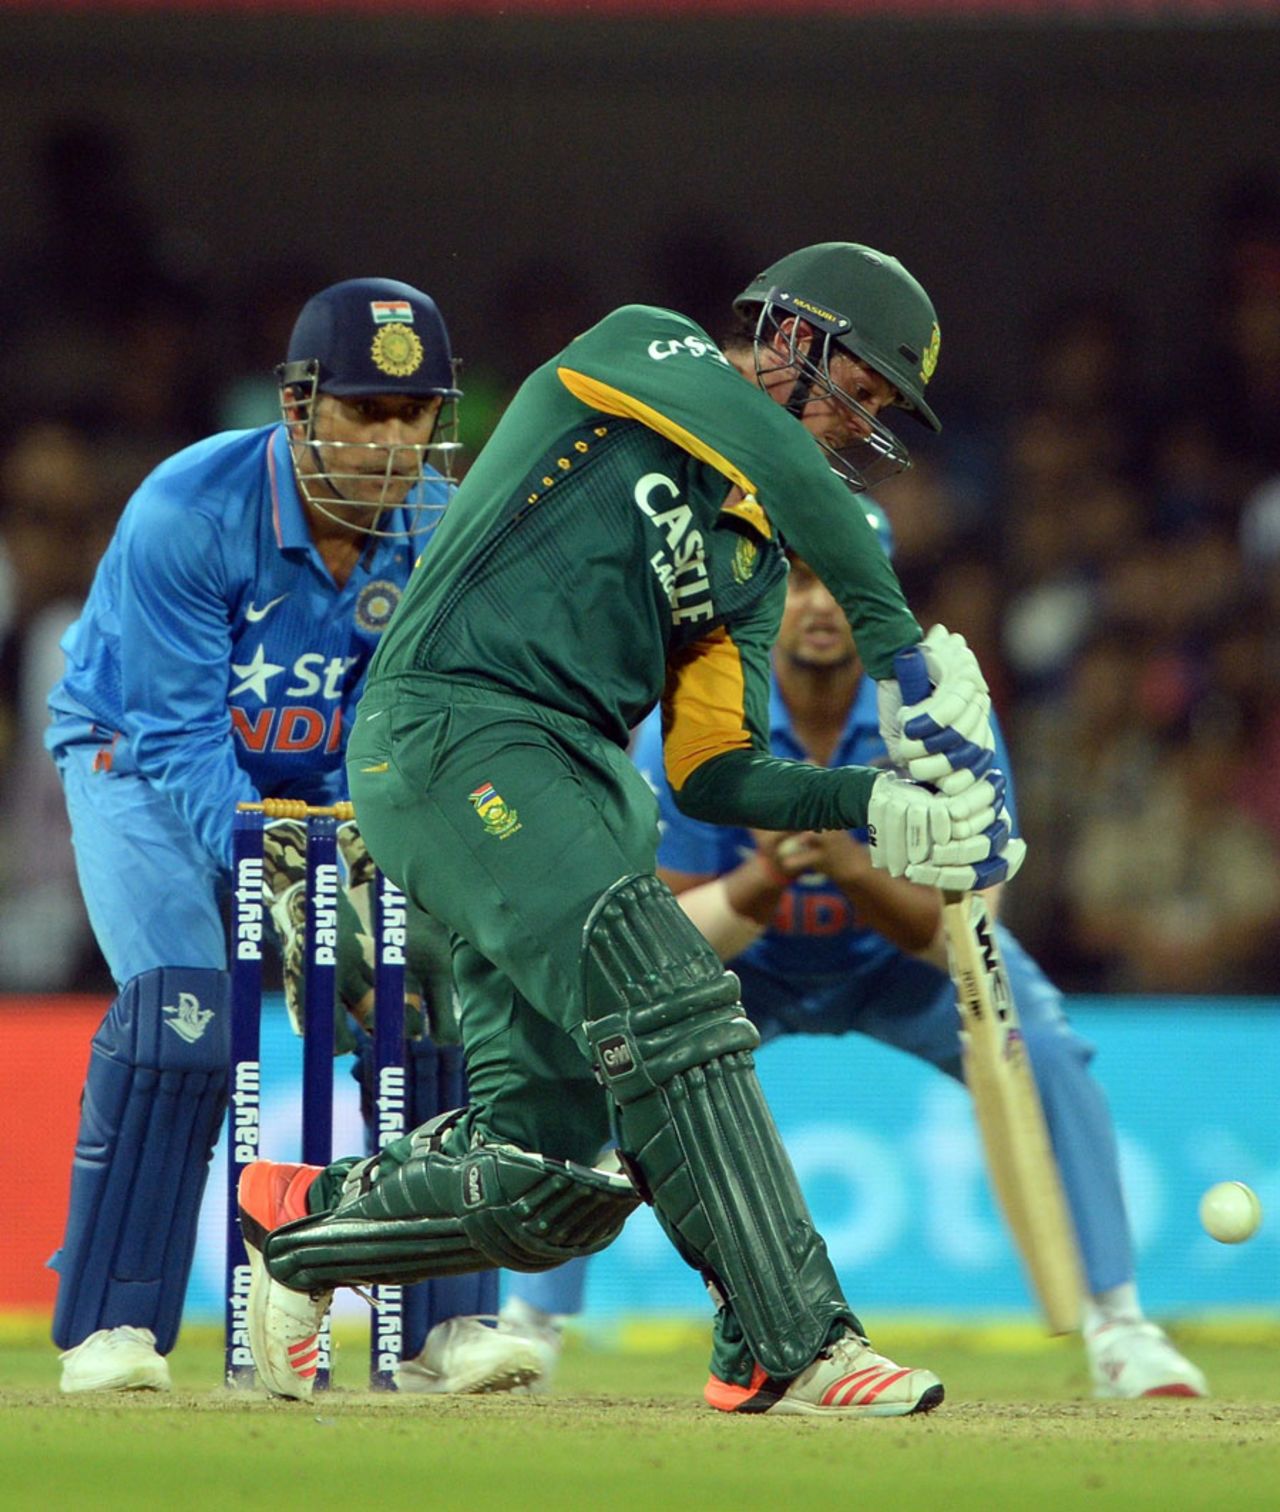 Quinton de Kock goes through the off side, India v South Africa, 2nd ODI, Indore, October 14, 2015